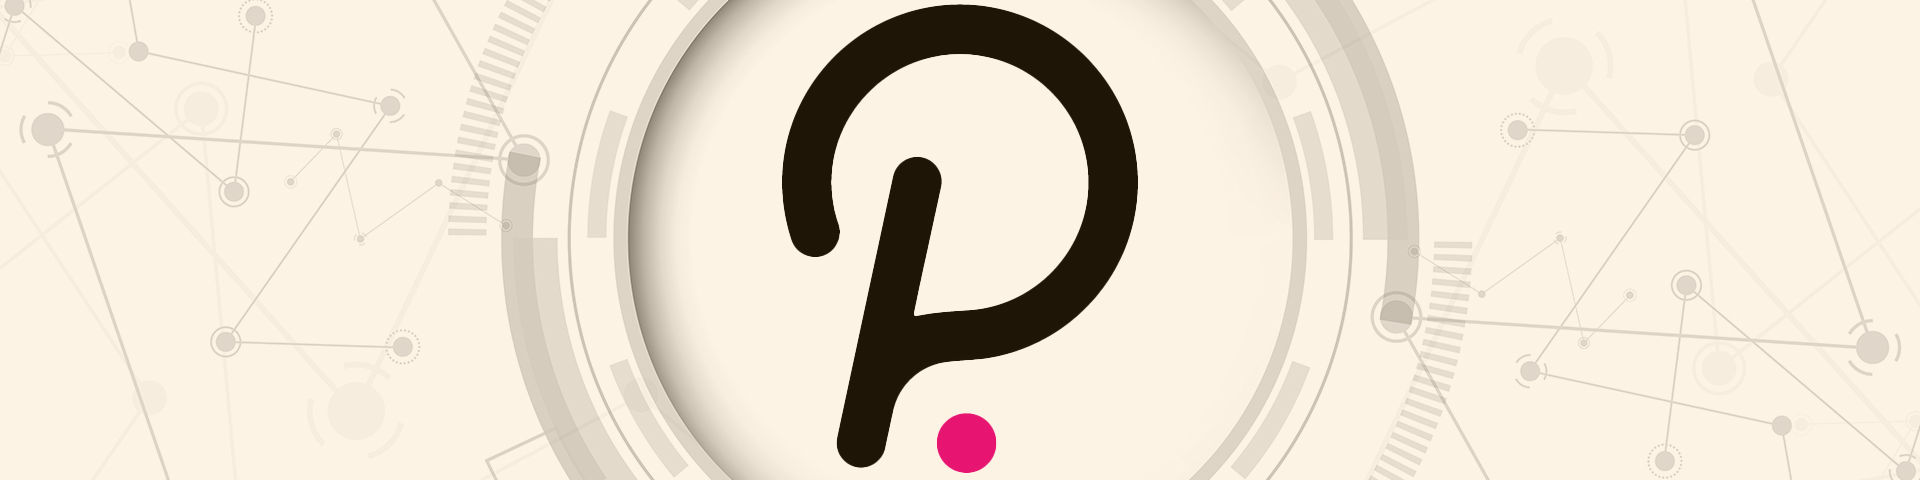 Will Facebook partner with Polkadot?